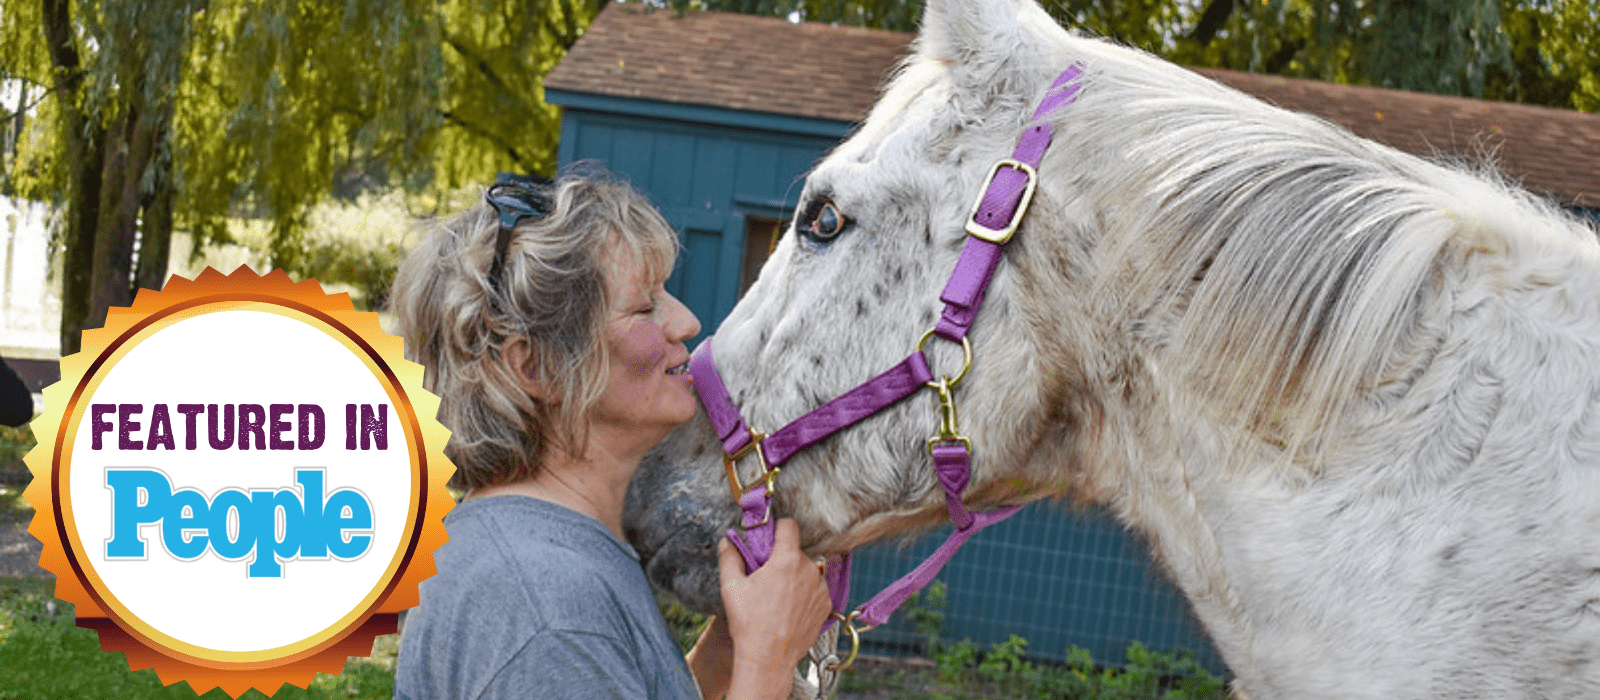 New Rescue: <br> A Blind Horse Named Buddy